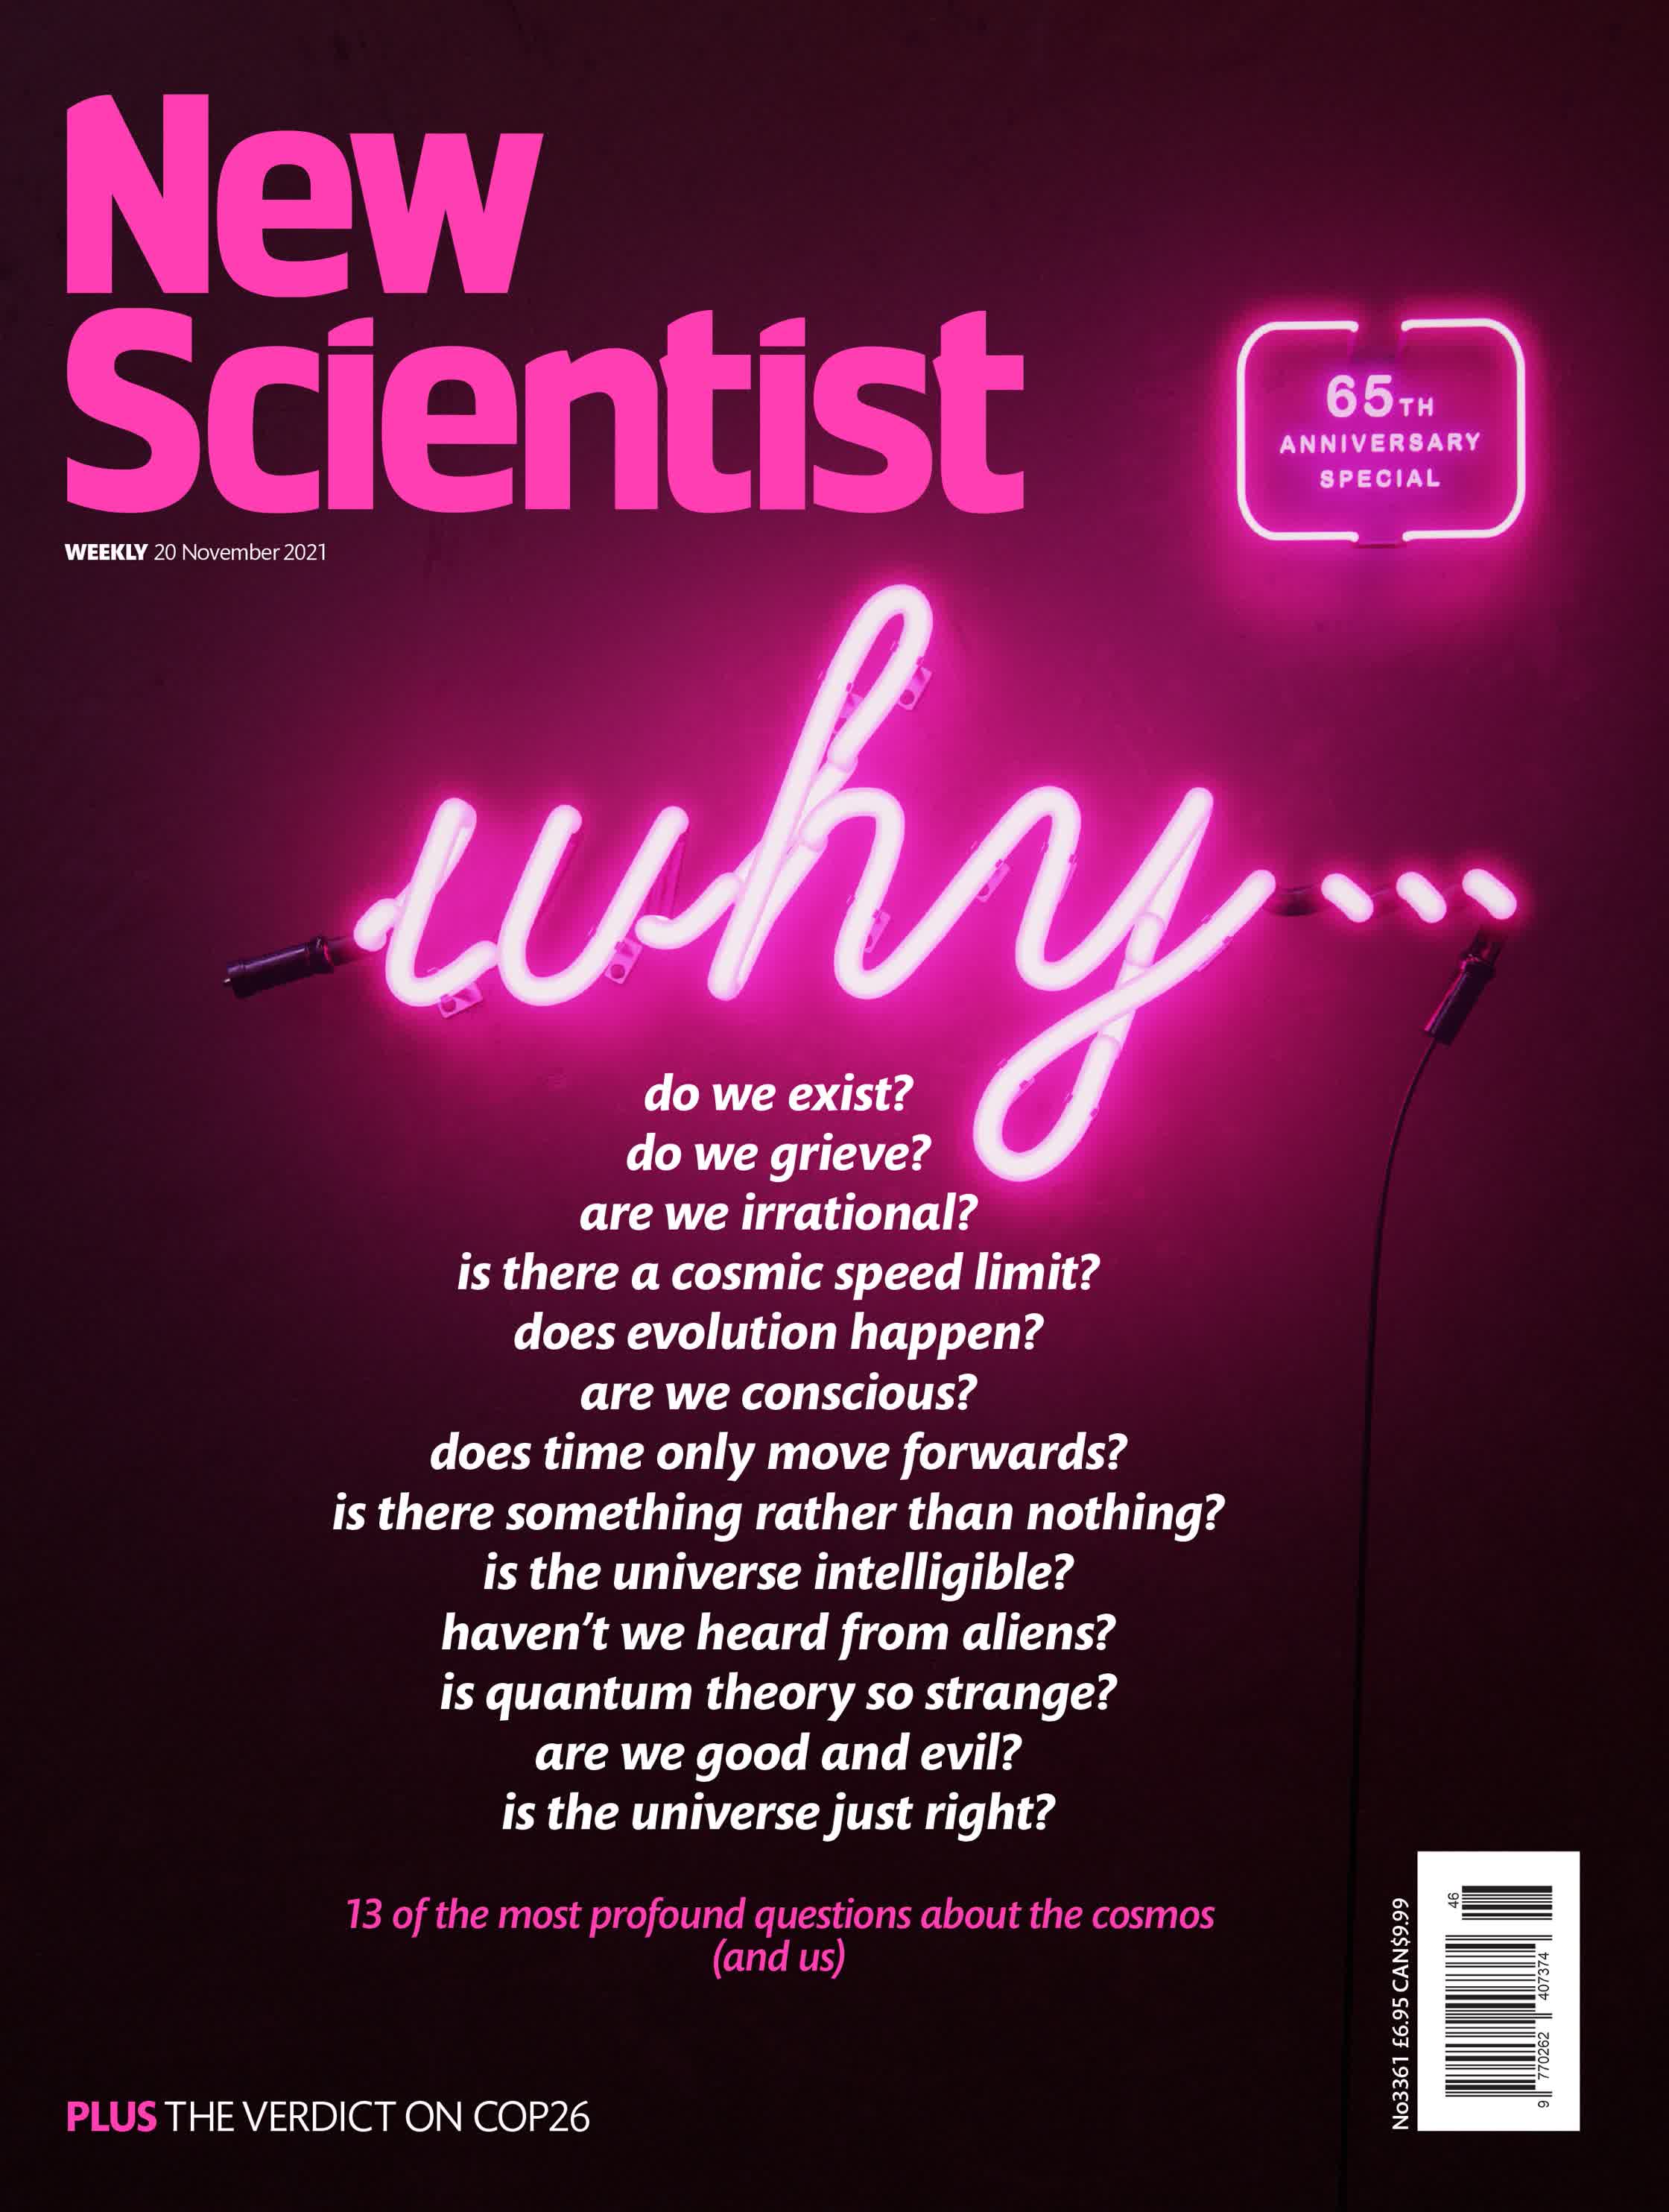 Why_65thAniversarySpecial_NewScientist_pcrowther.jpg